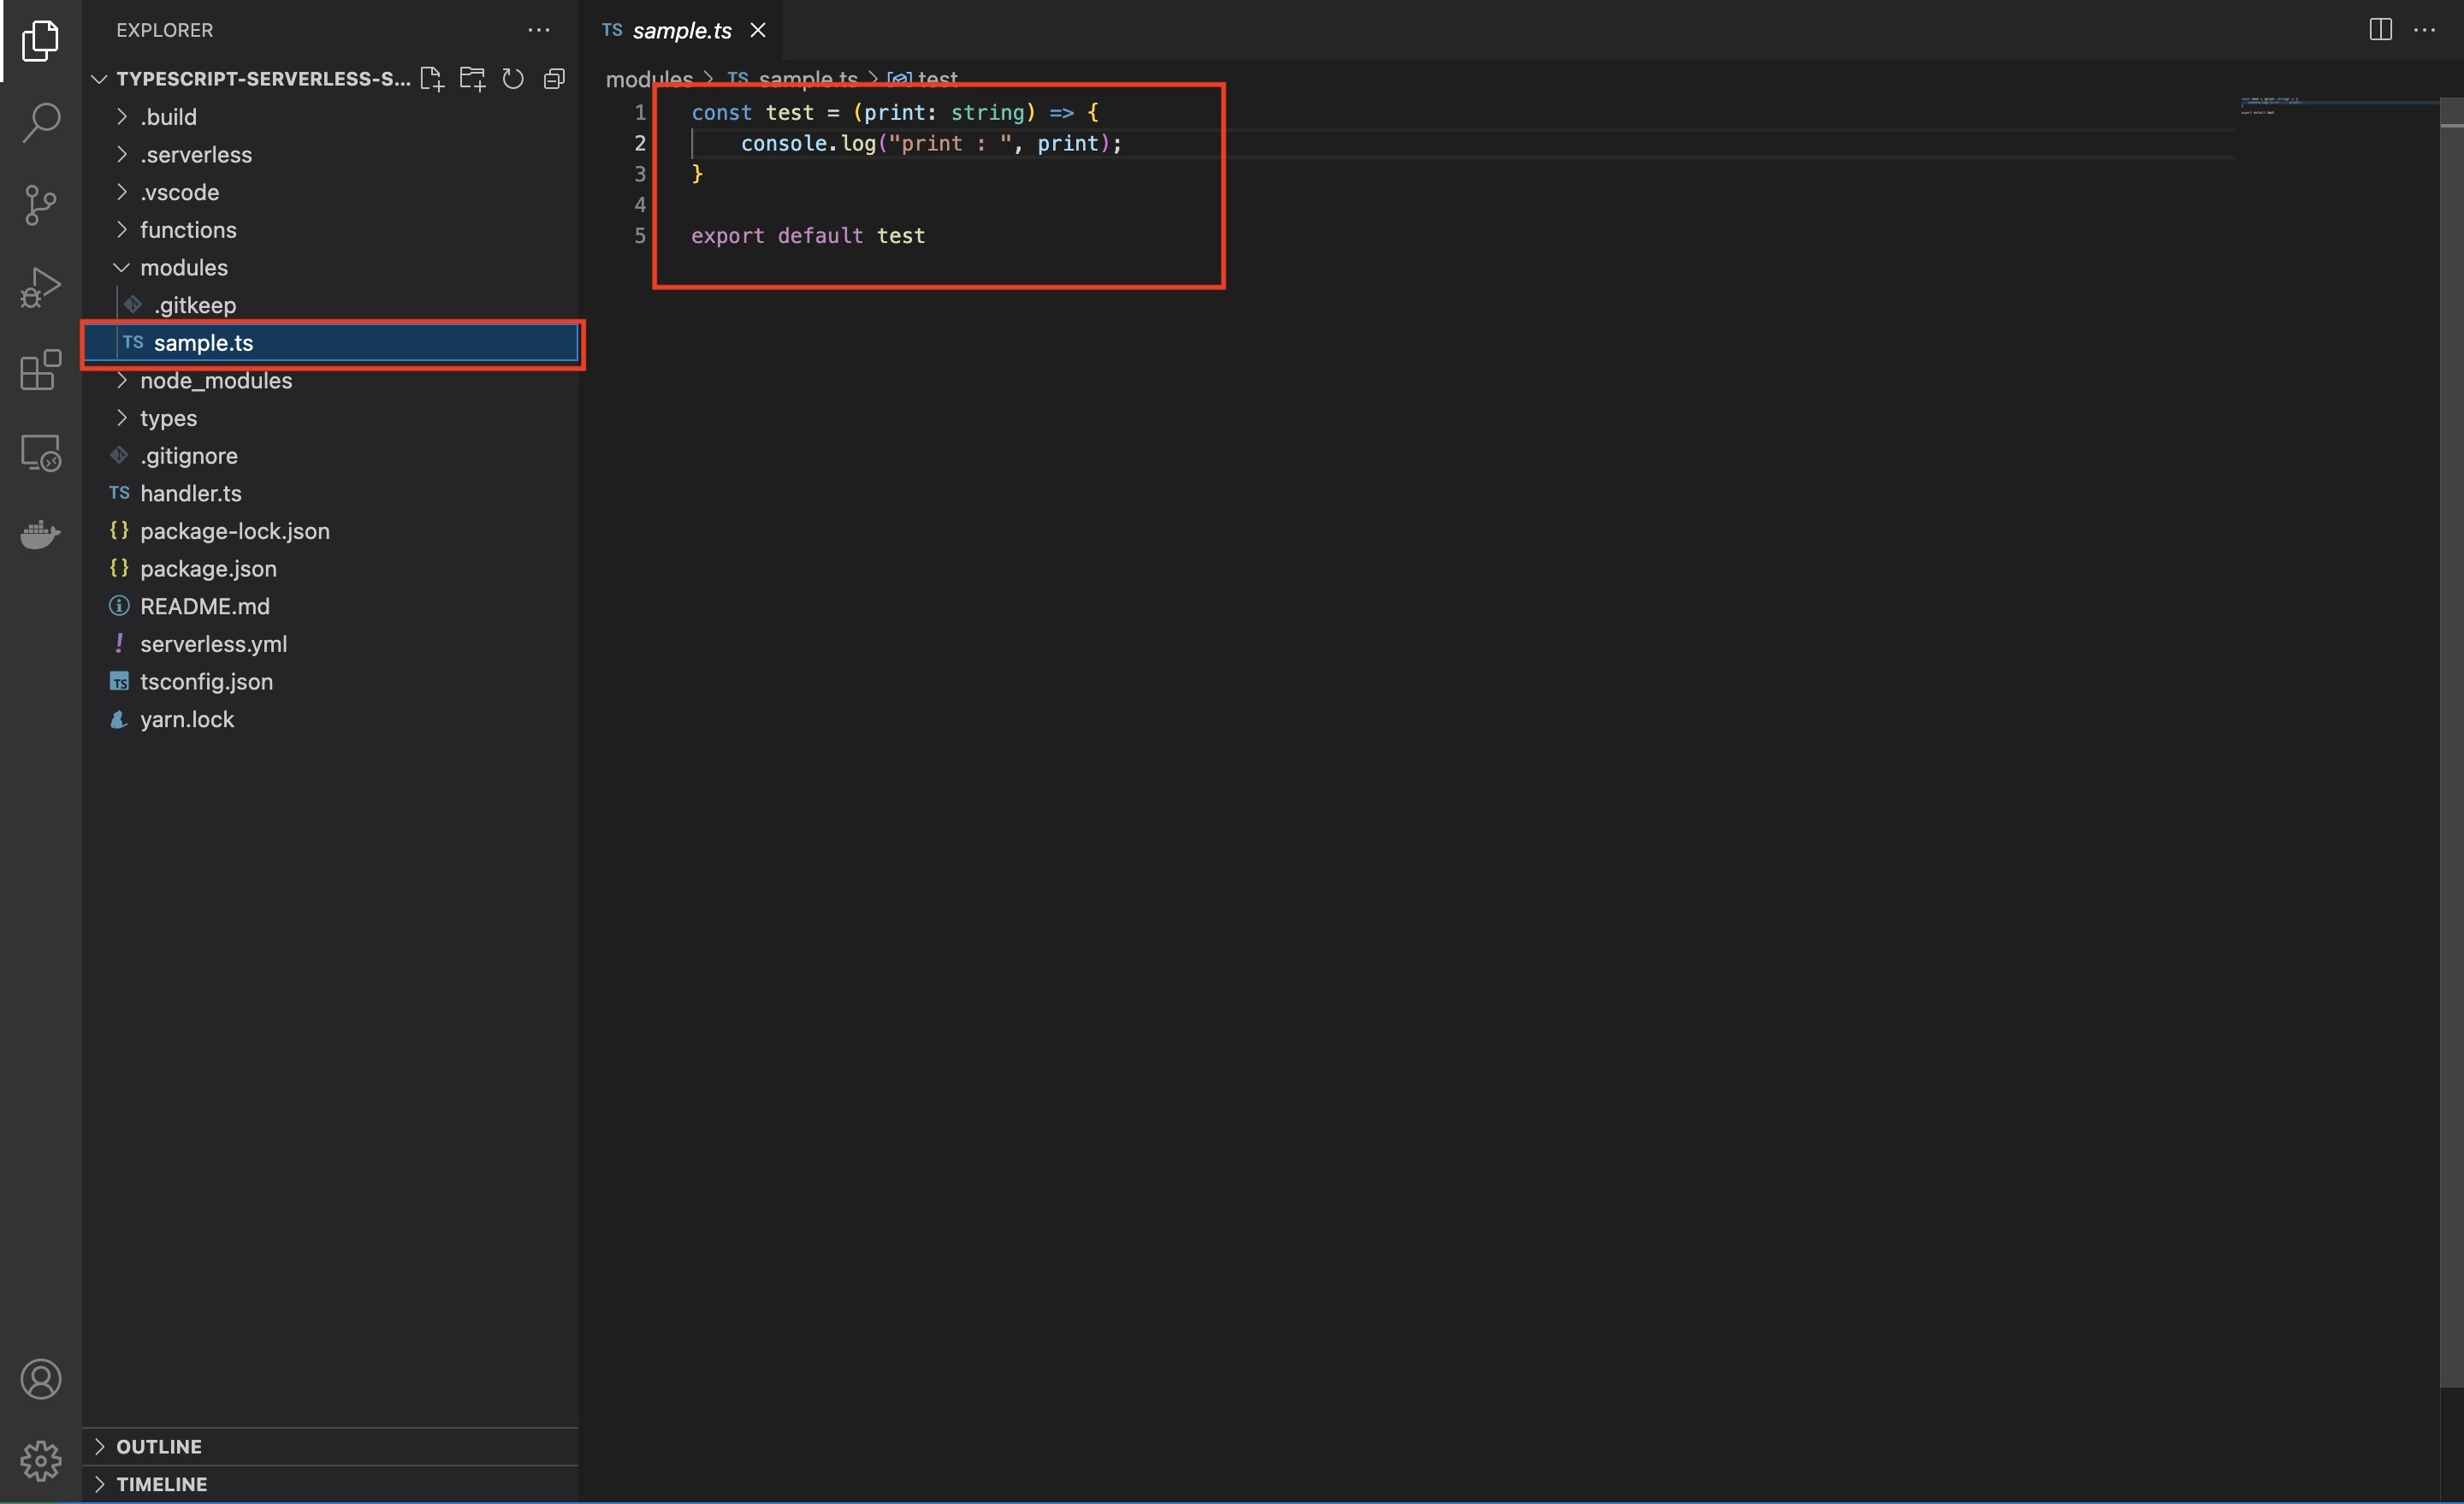 A screenshot of VSCode showing the sample.ts file with the test function that we created that logs "sample" to the console.